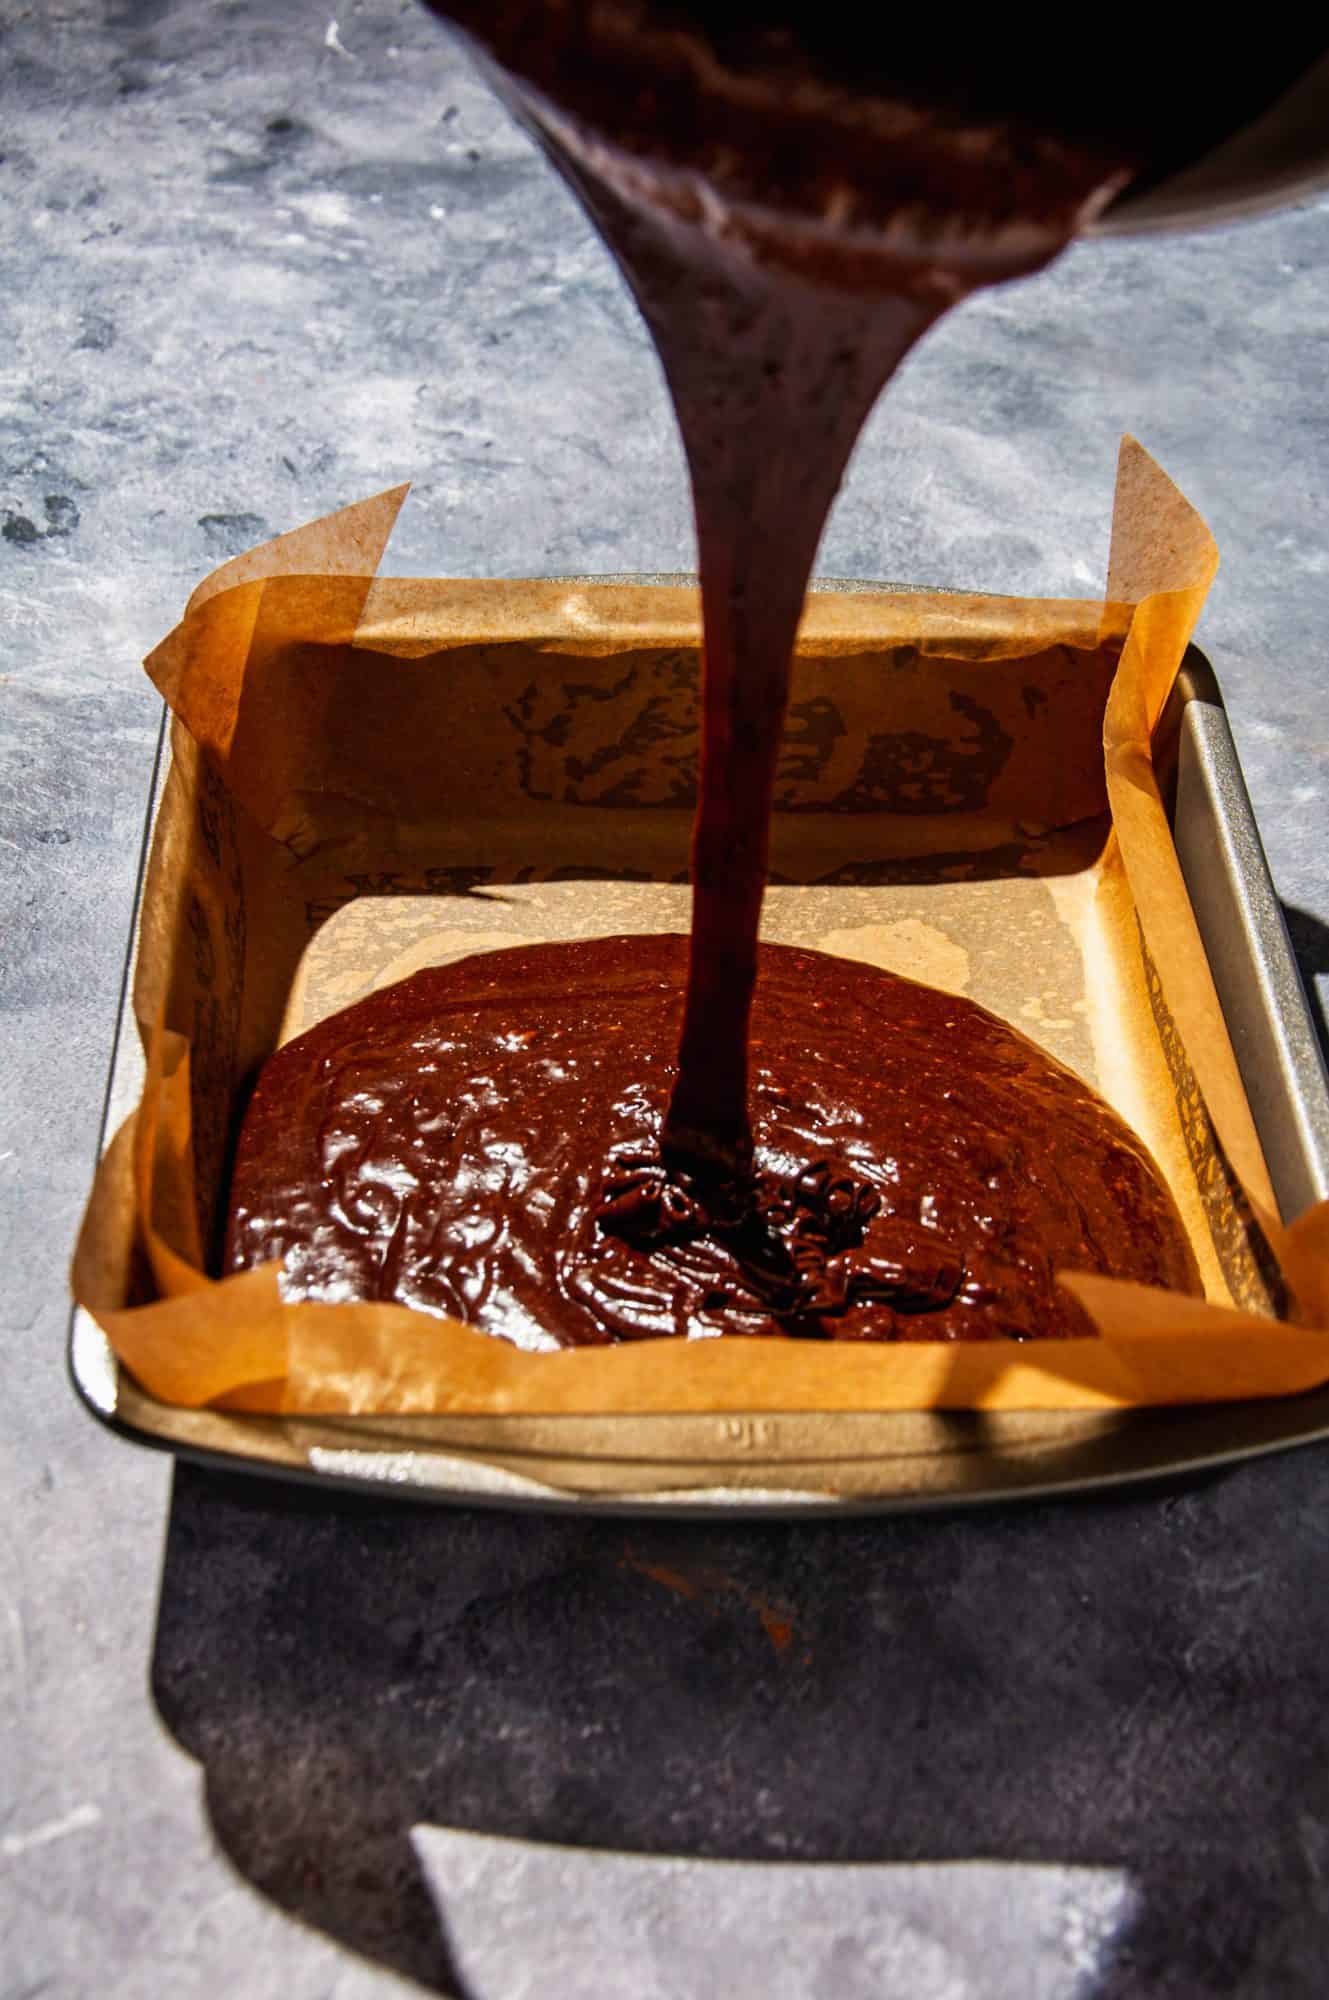 action shot shows pouring brownie batter from a bowl into a square baking pan lined with parchment paper